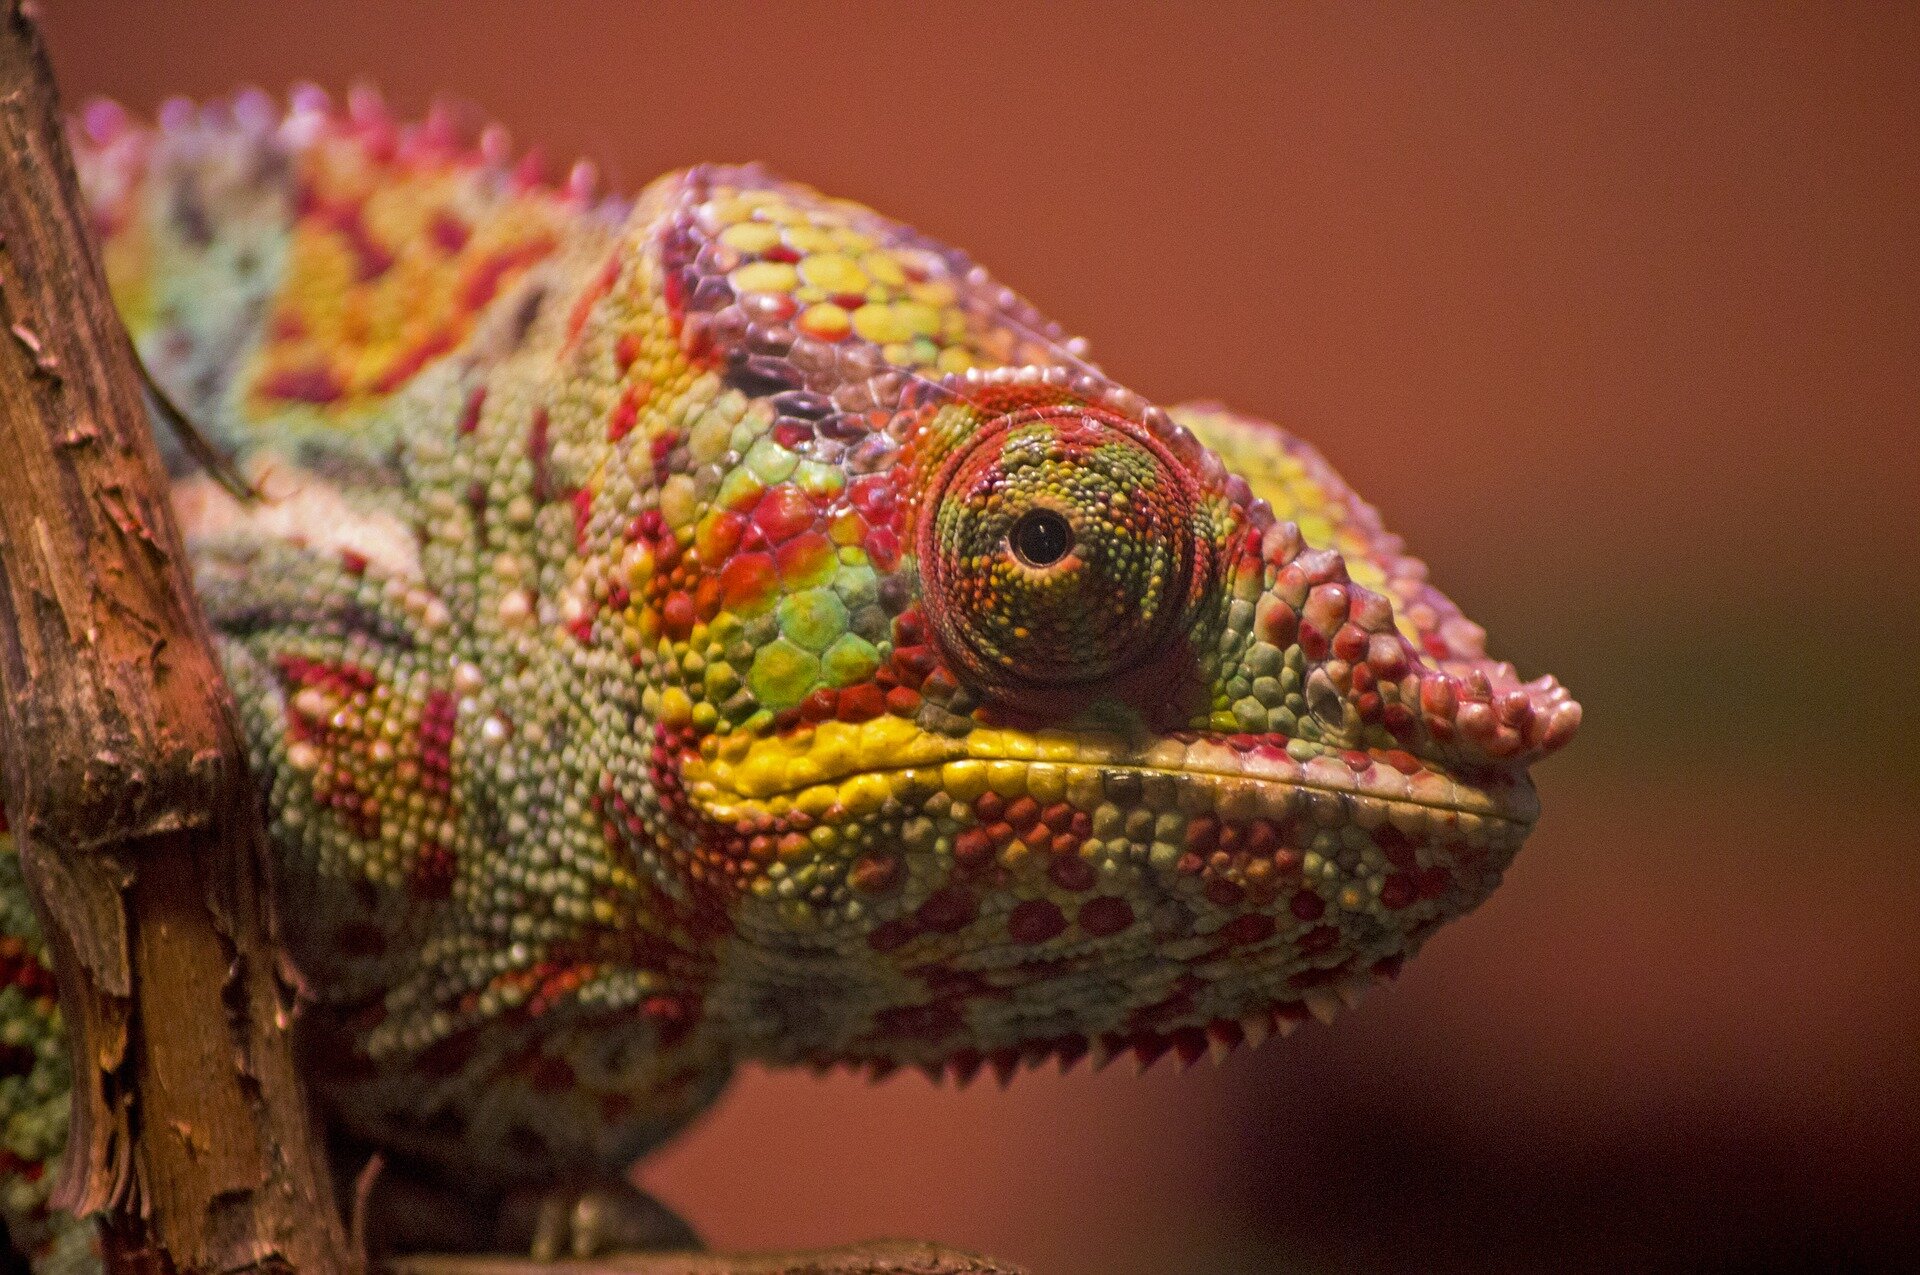 Over 21% of reptile species at risk of extinction